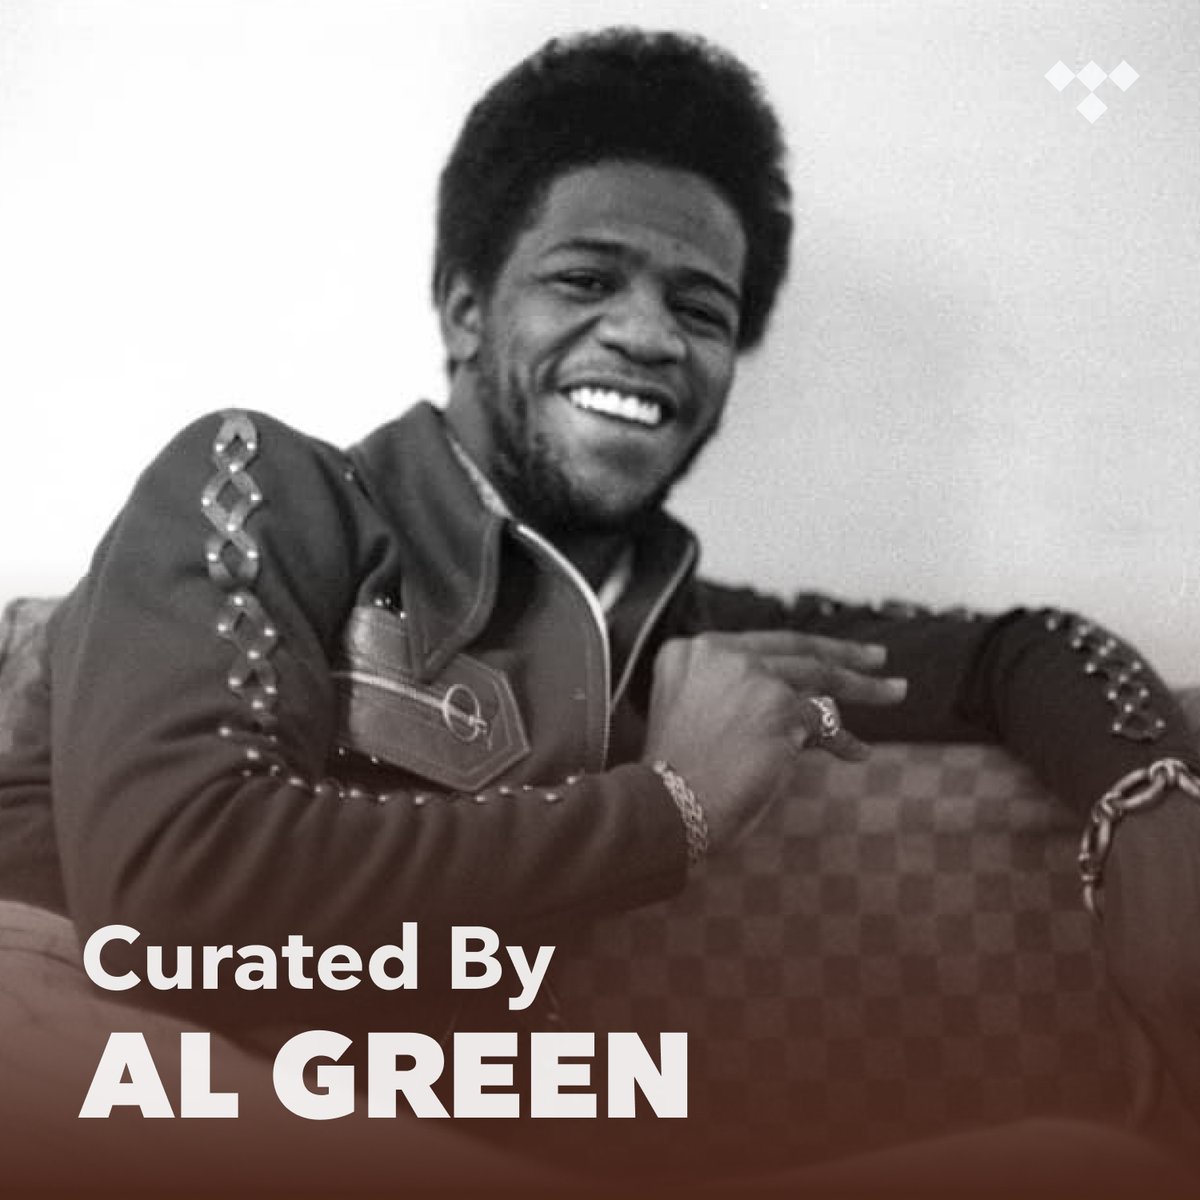 Al Green curated a playlist for @TIDAL for Black History Month. Listen here: tidal.com/browse/playlis…